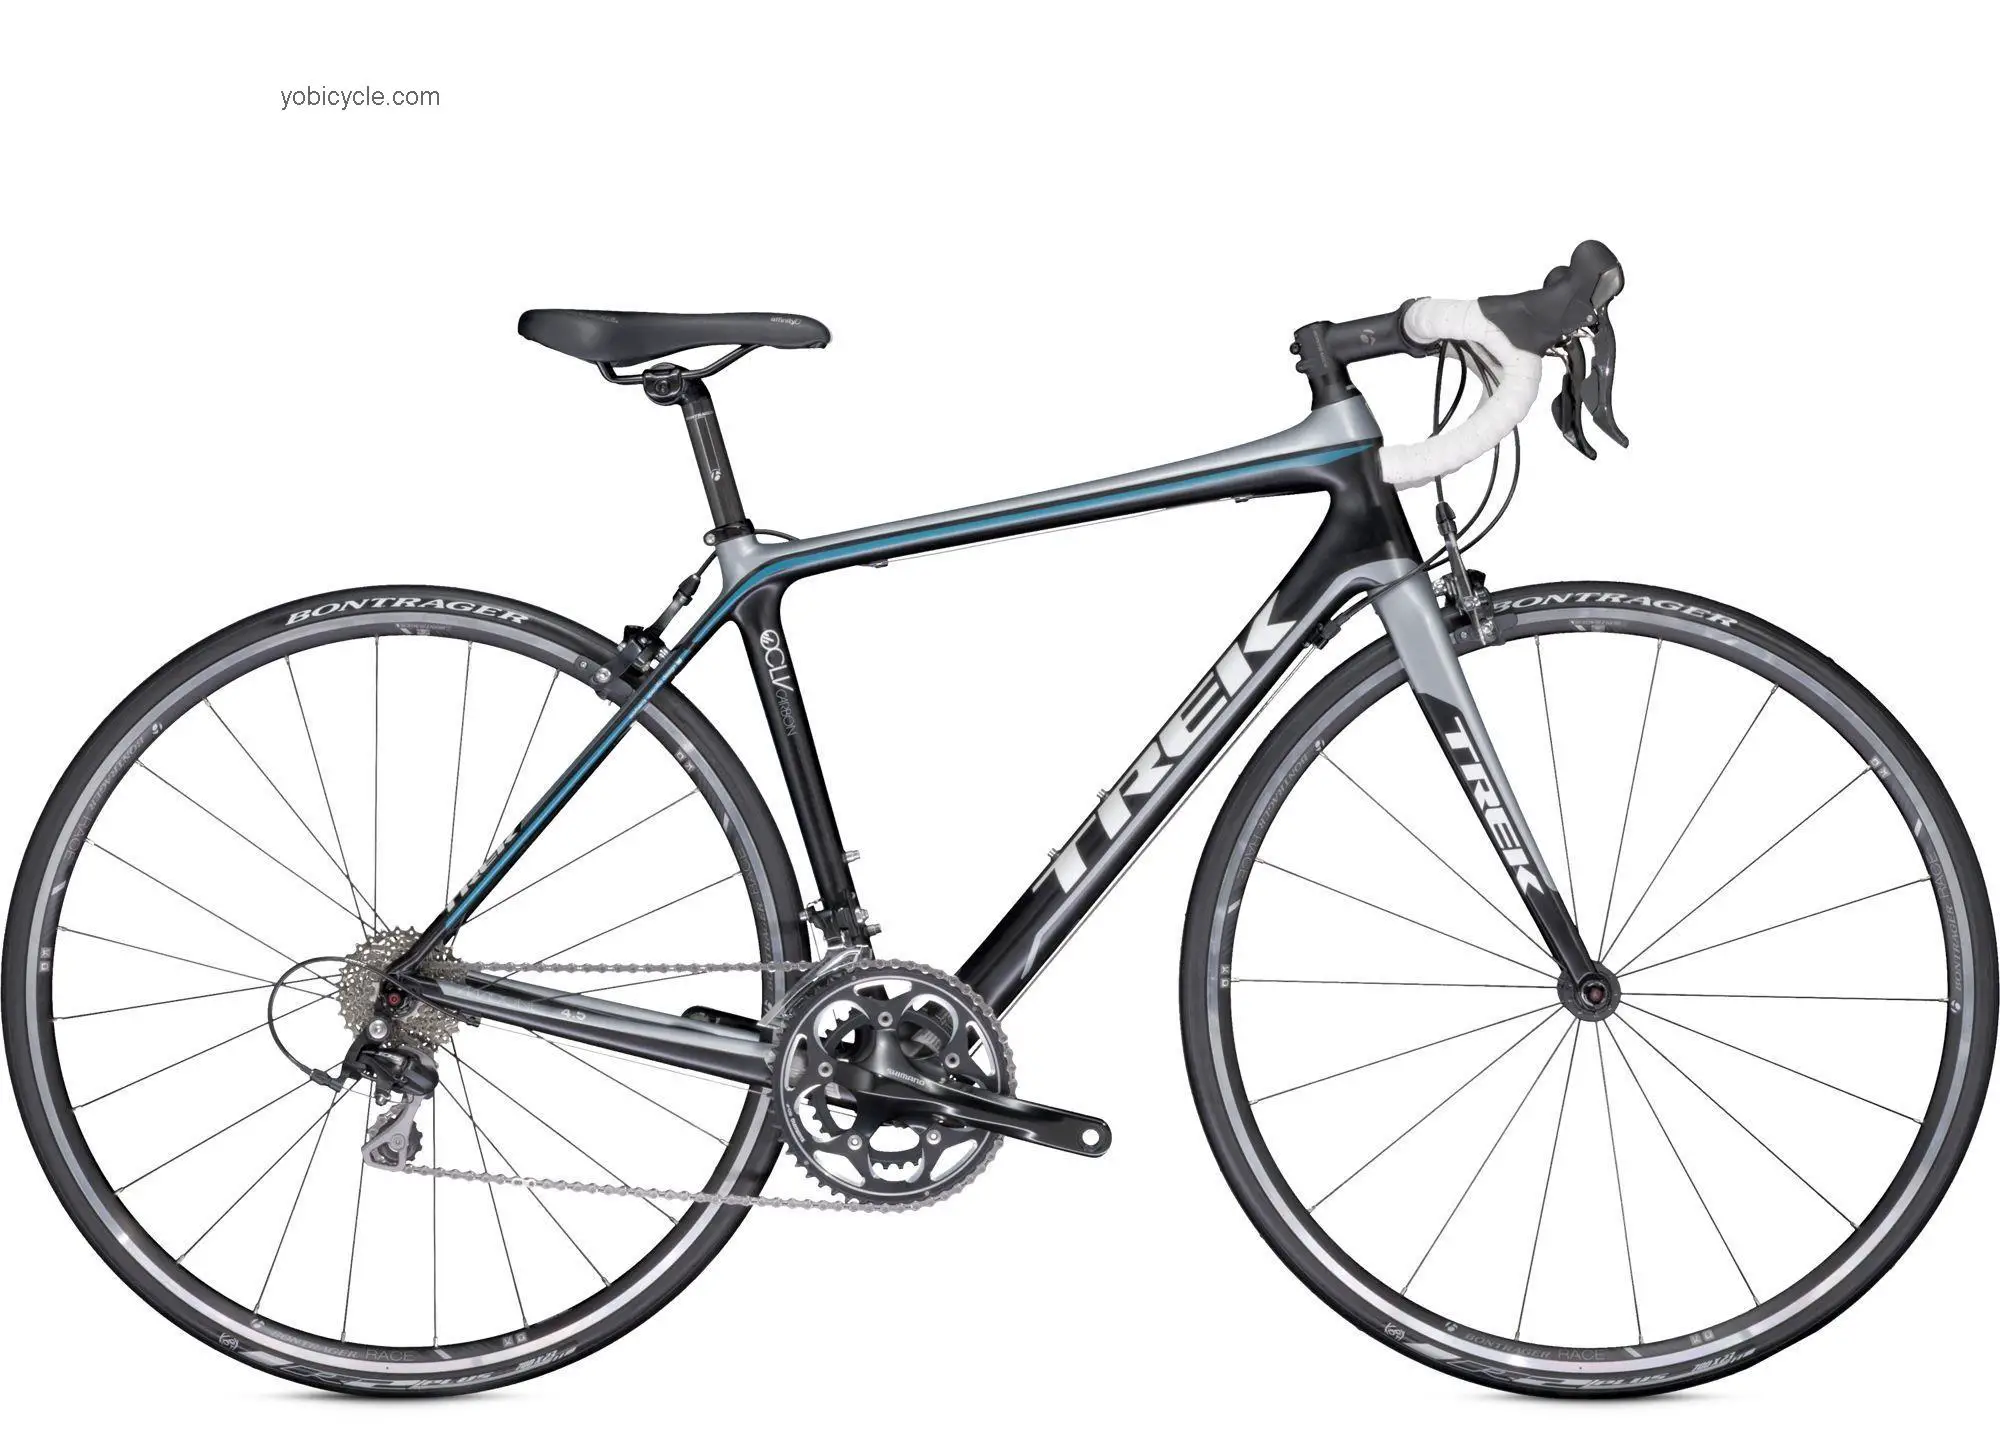 Trek Madone 4.5 WSD 2013 comparison online with competitors